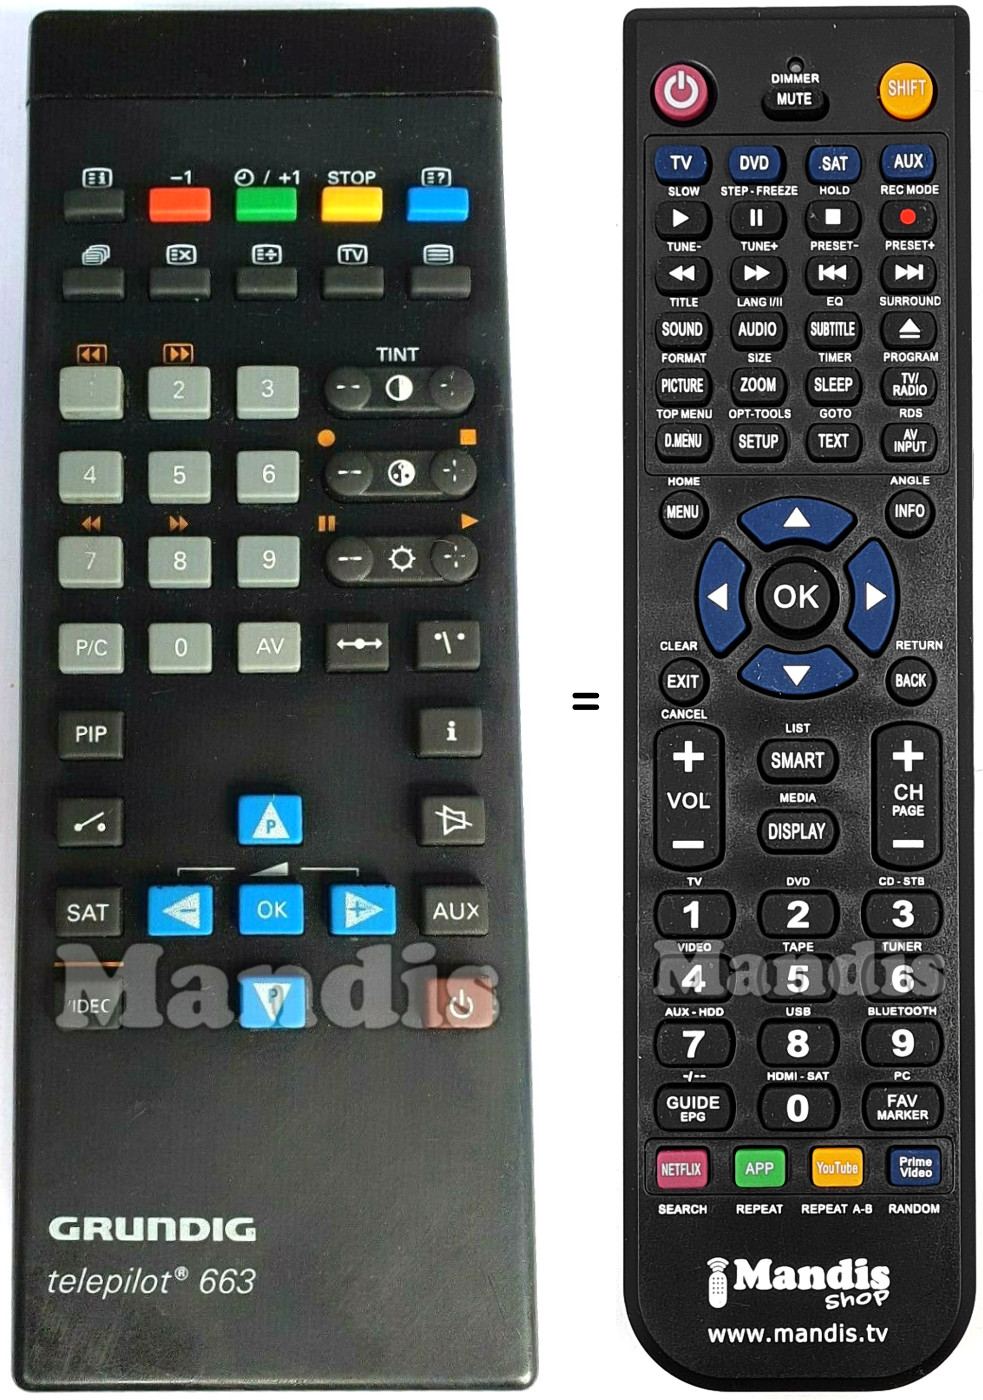 Replacement remote control Grundig telepilot 663